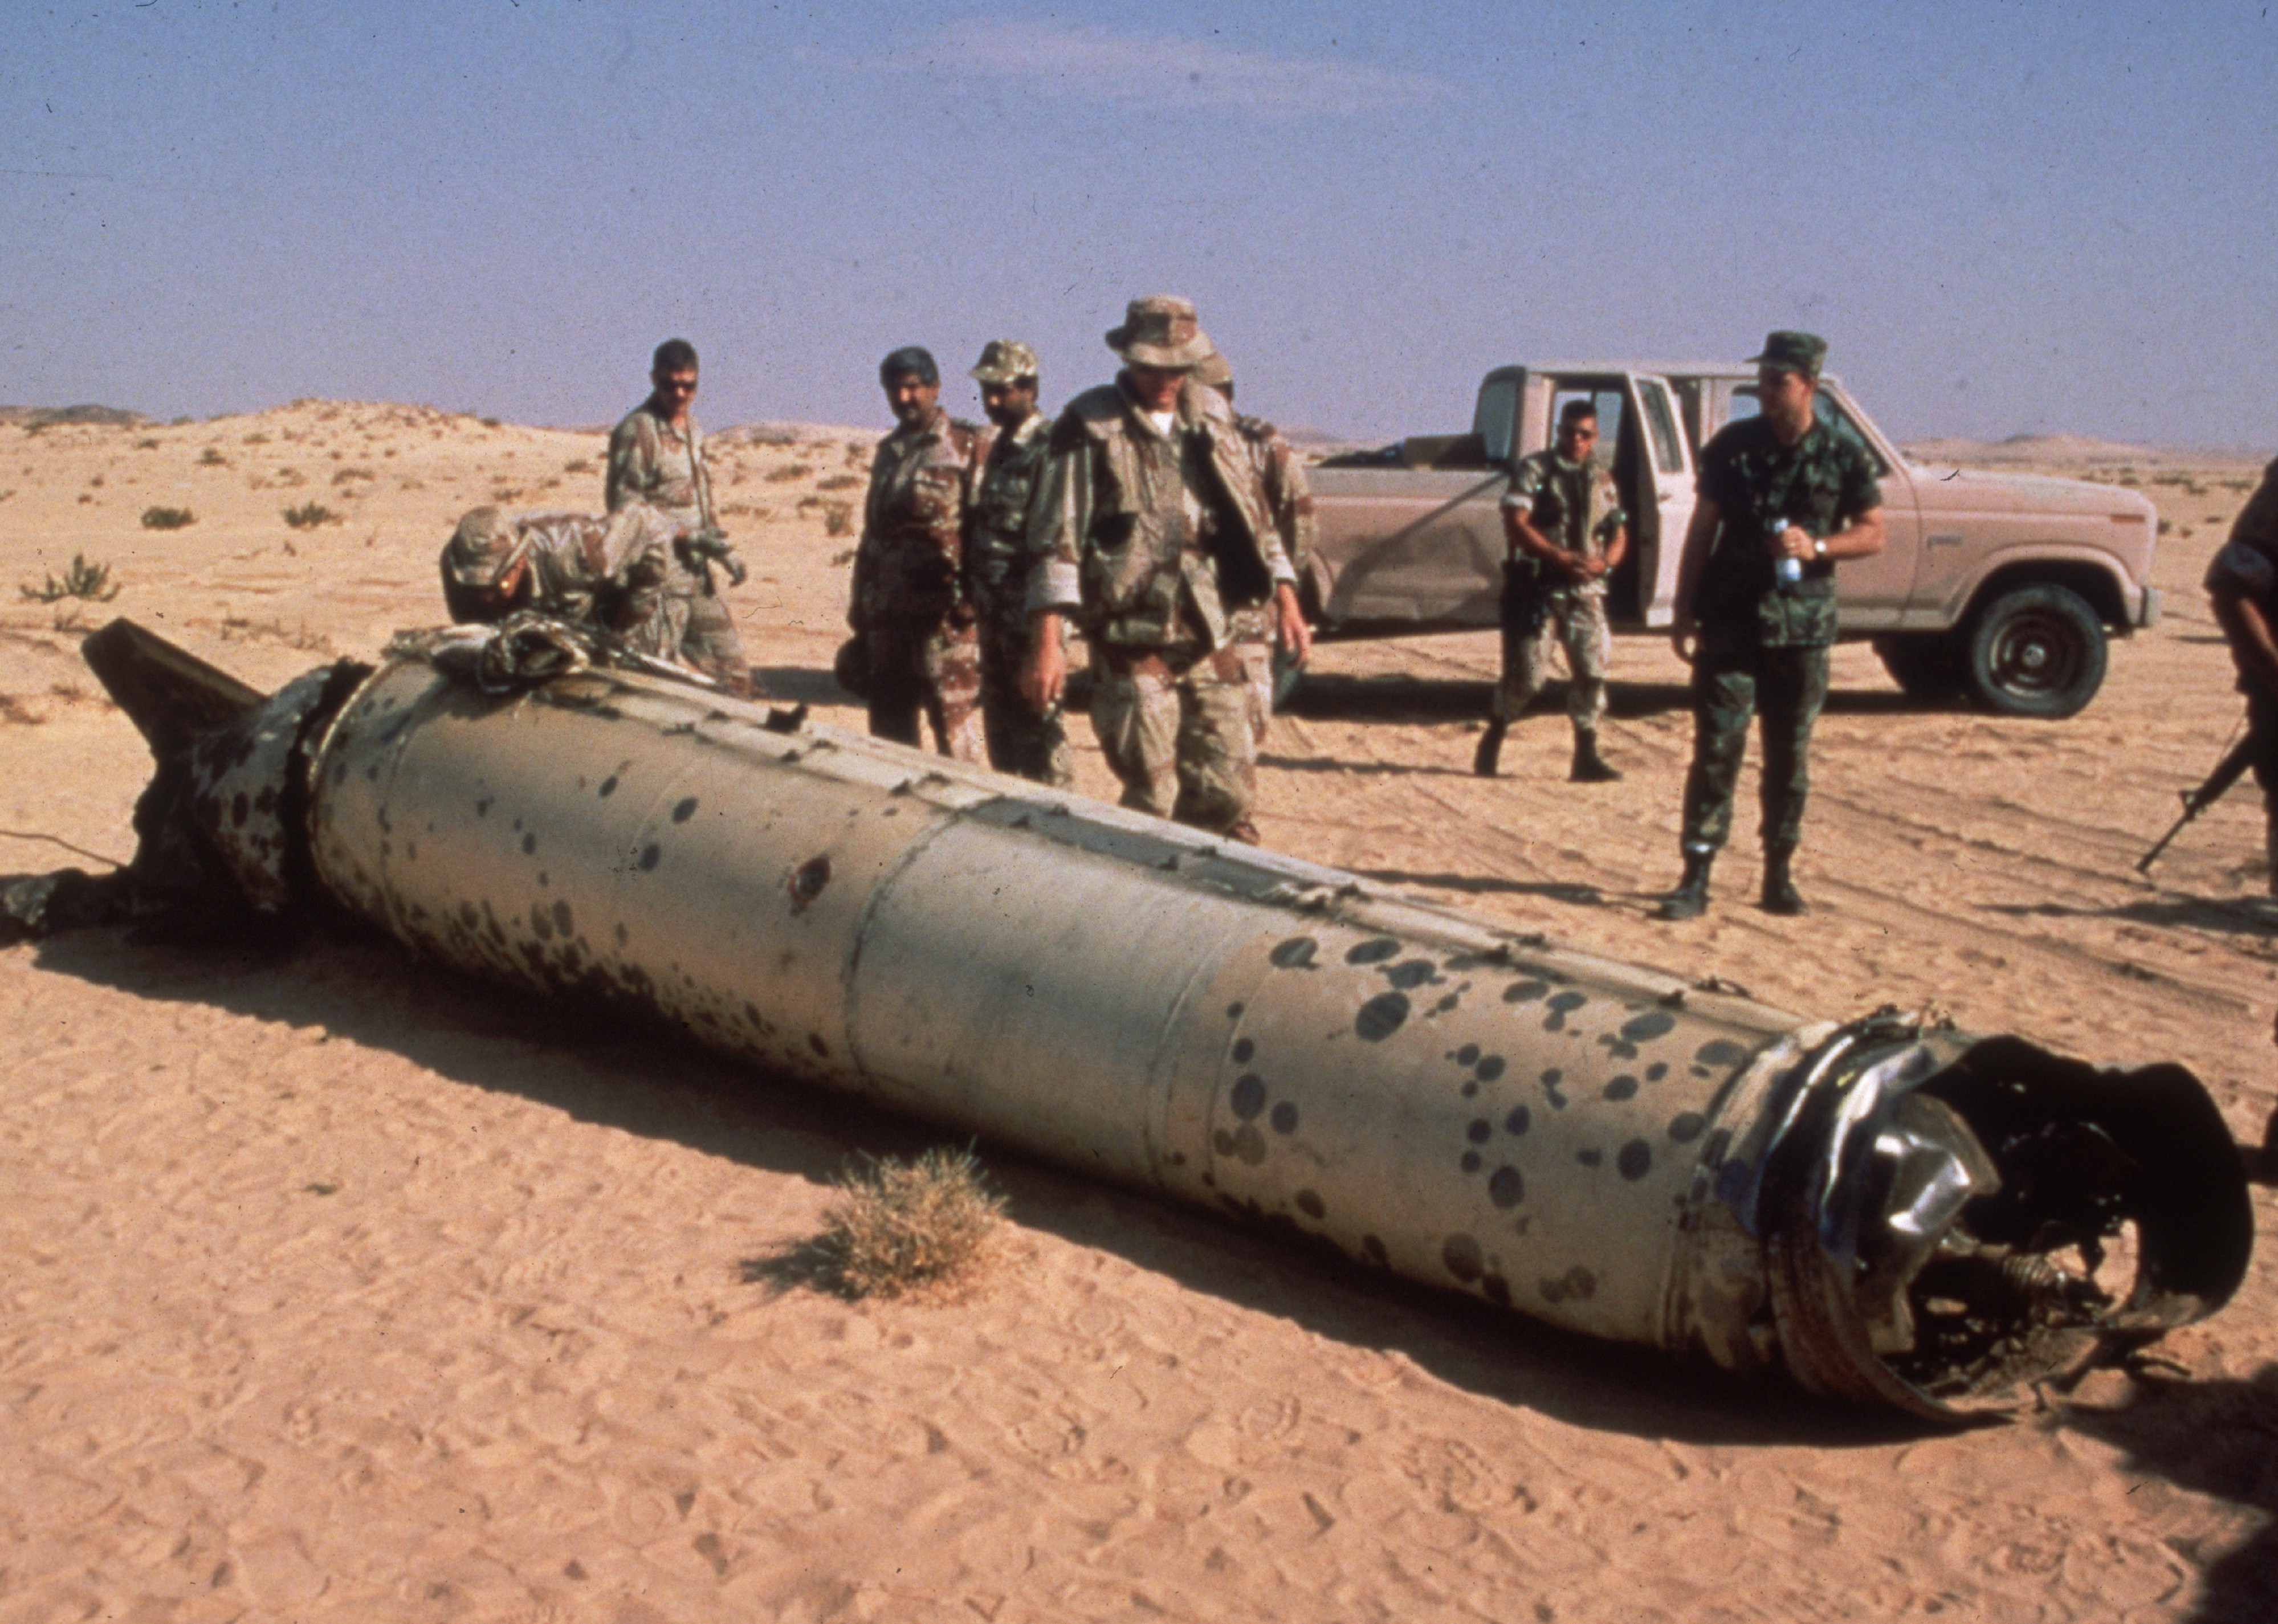 Allied troops stand around the remains of an Iraqi Scud missile in the desert during Operation Desert Storm.